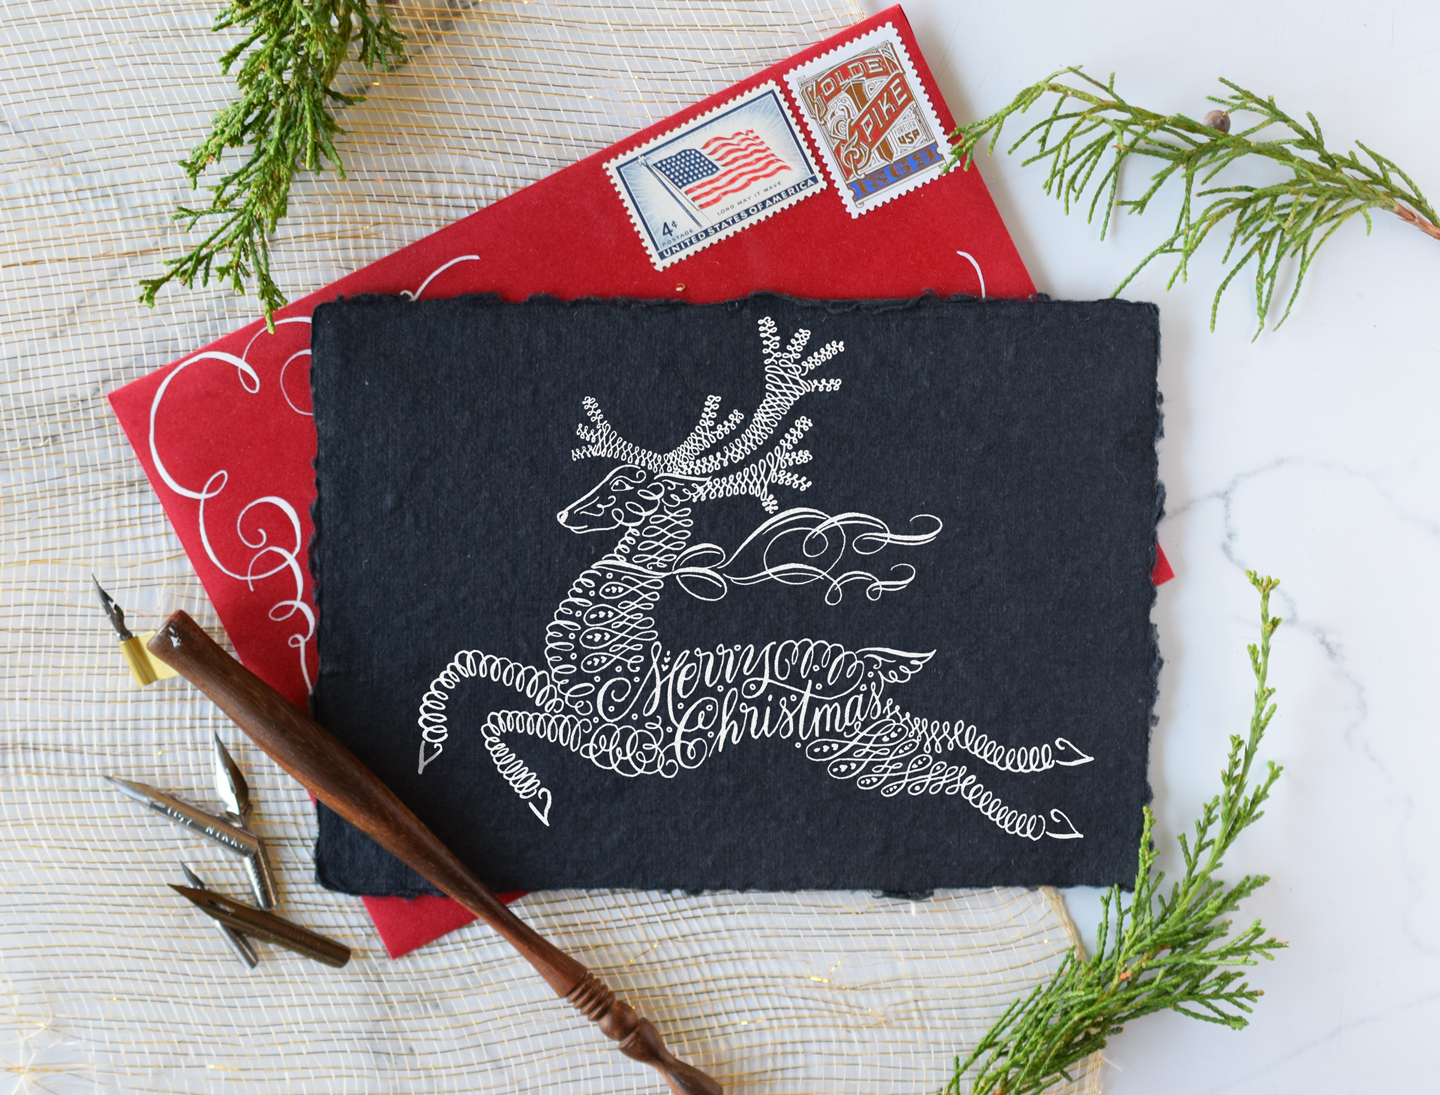 Flourished Calligraphy Reindeer Tutorial (Guest Post by Maureen Vickery)